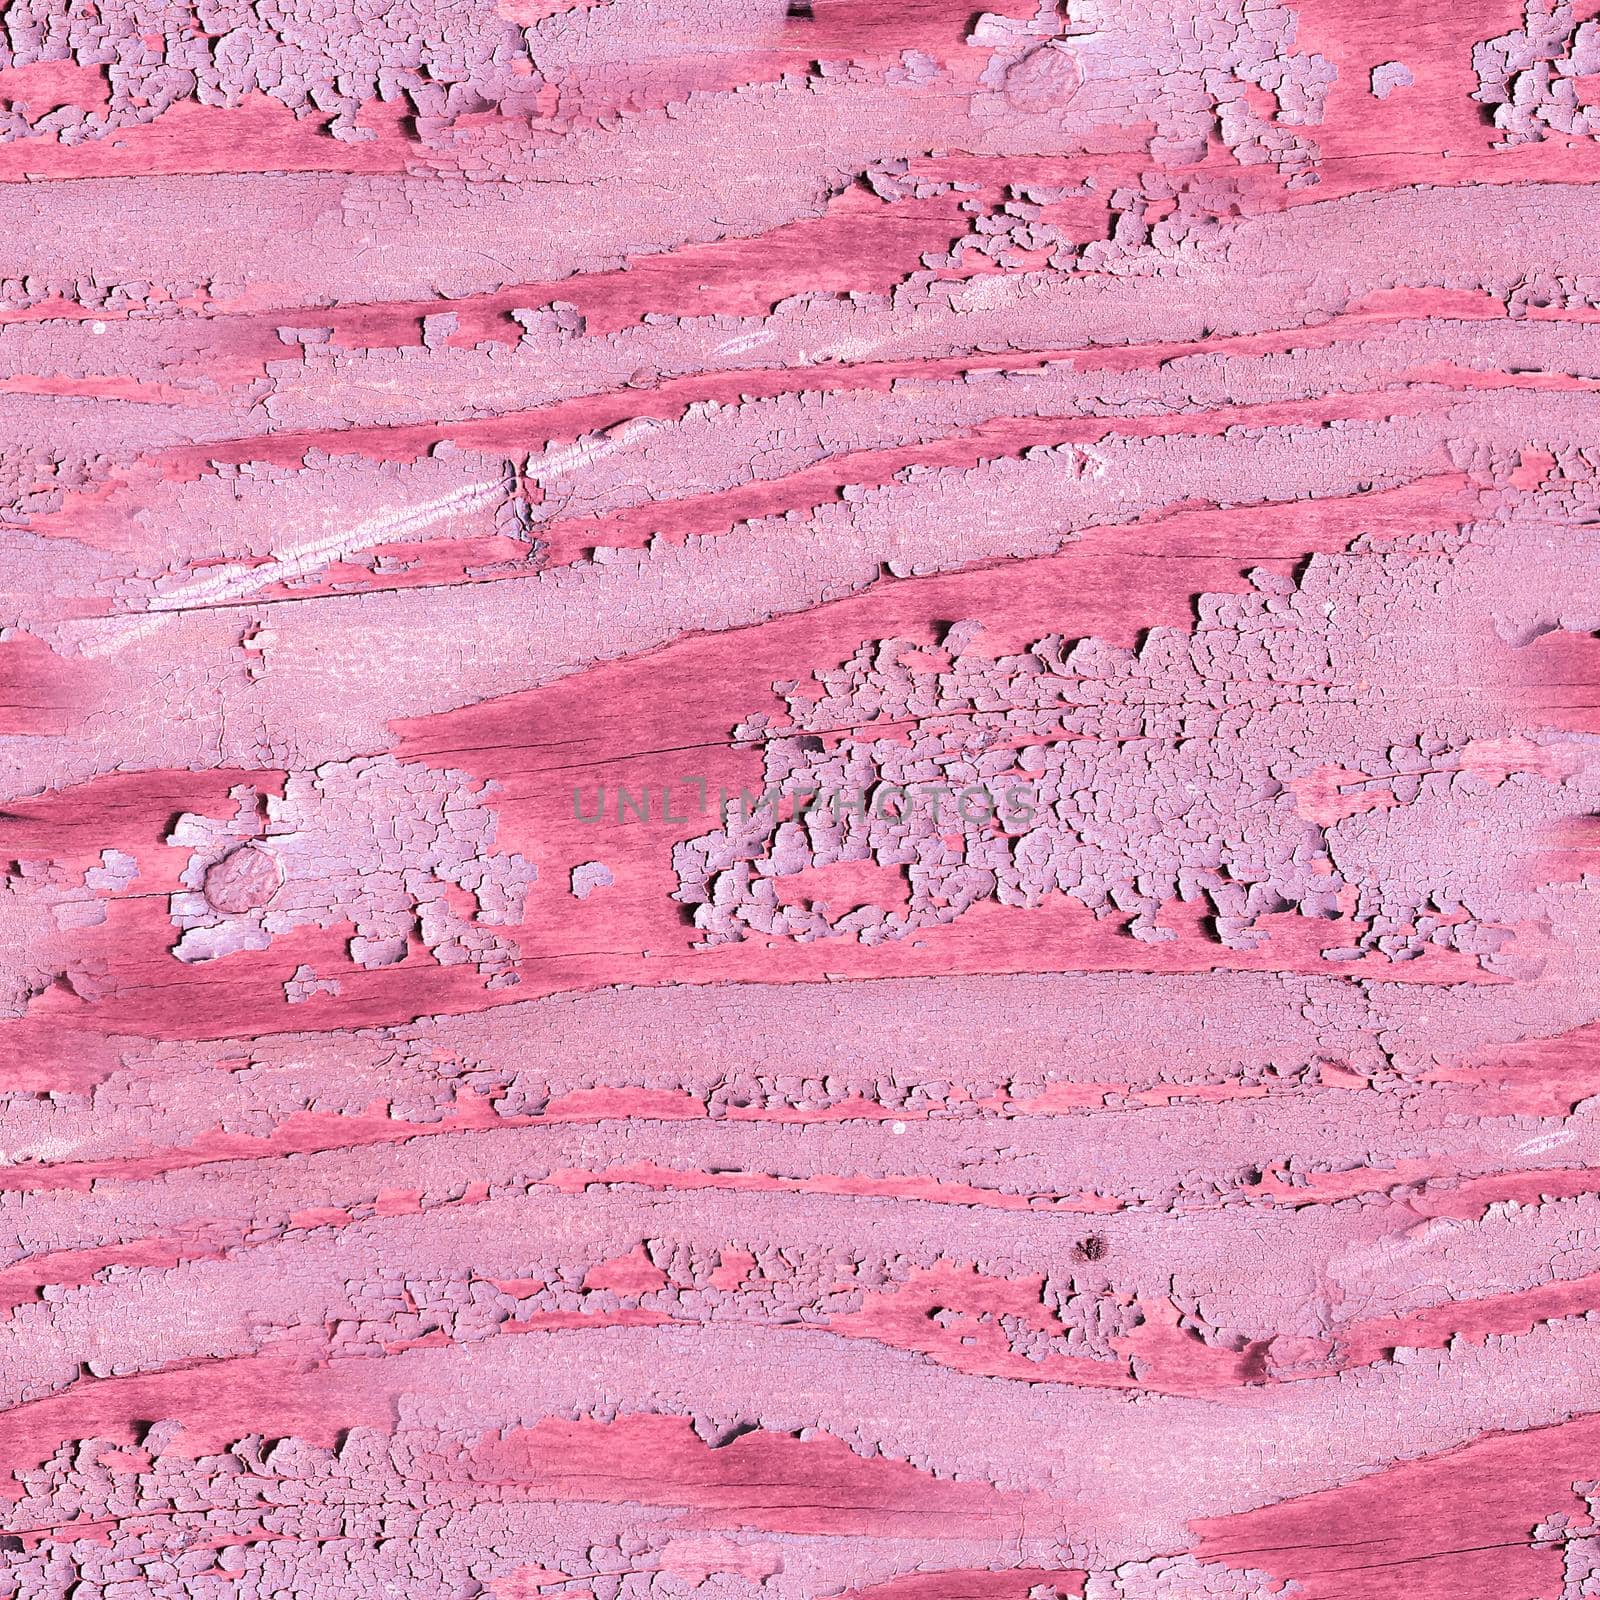 Pink Painted Wood. Worn Marble Wallpaper. Ancient Break Fence. Damaged Painted Wood. Aged Organic Tree Structure. Weathered Eroded Effect. Dark Dry Texture. Red Seamless Painted Wood.